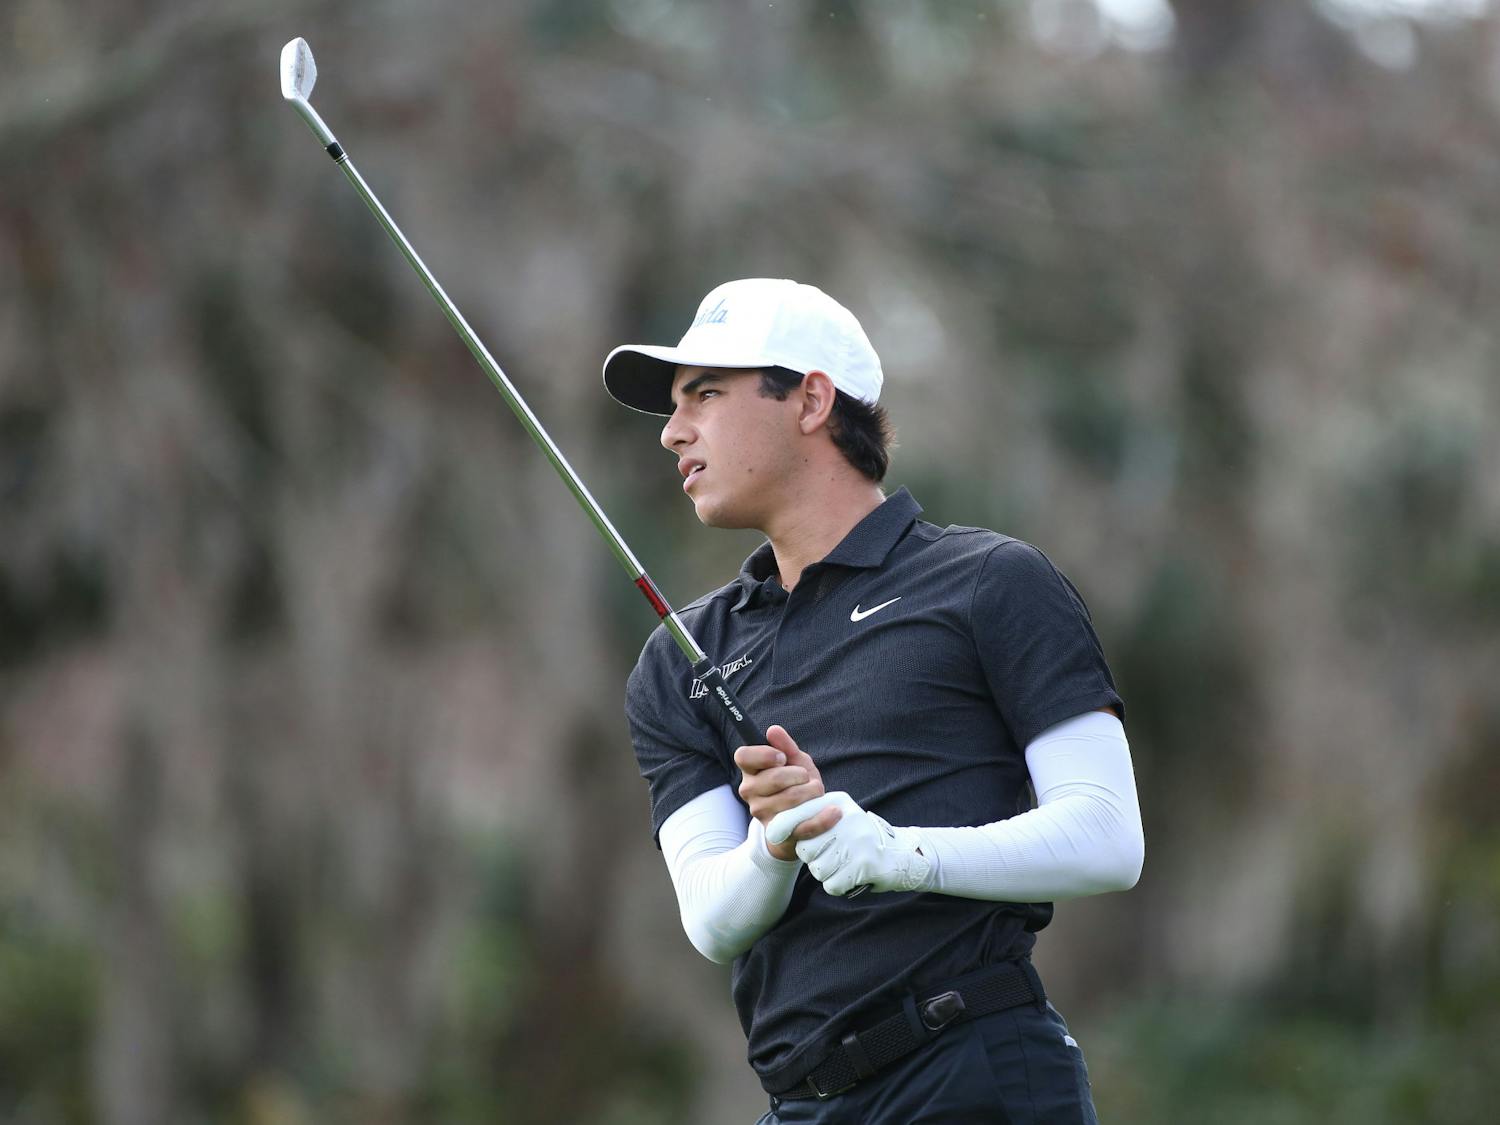 Florida redshirt freshman Miguel Leal swings his club in the Sea Best Invitational Tuesday, Jan. 31, 2023. Photo by Courtney Culbreath